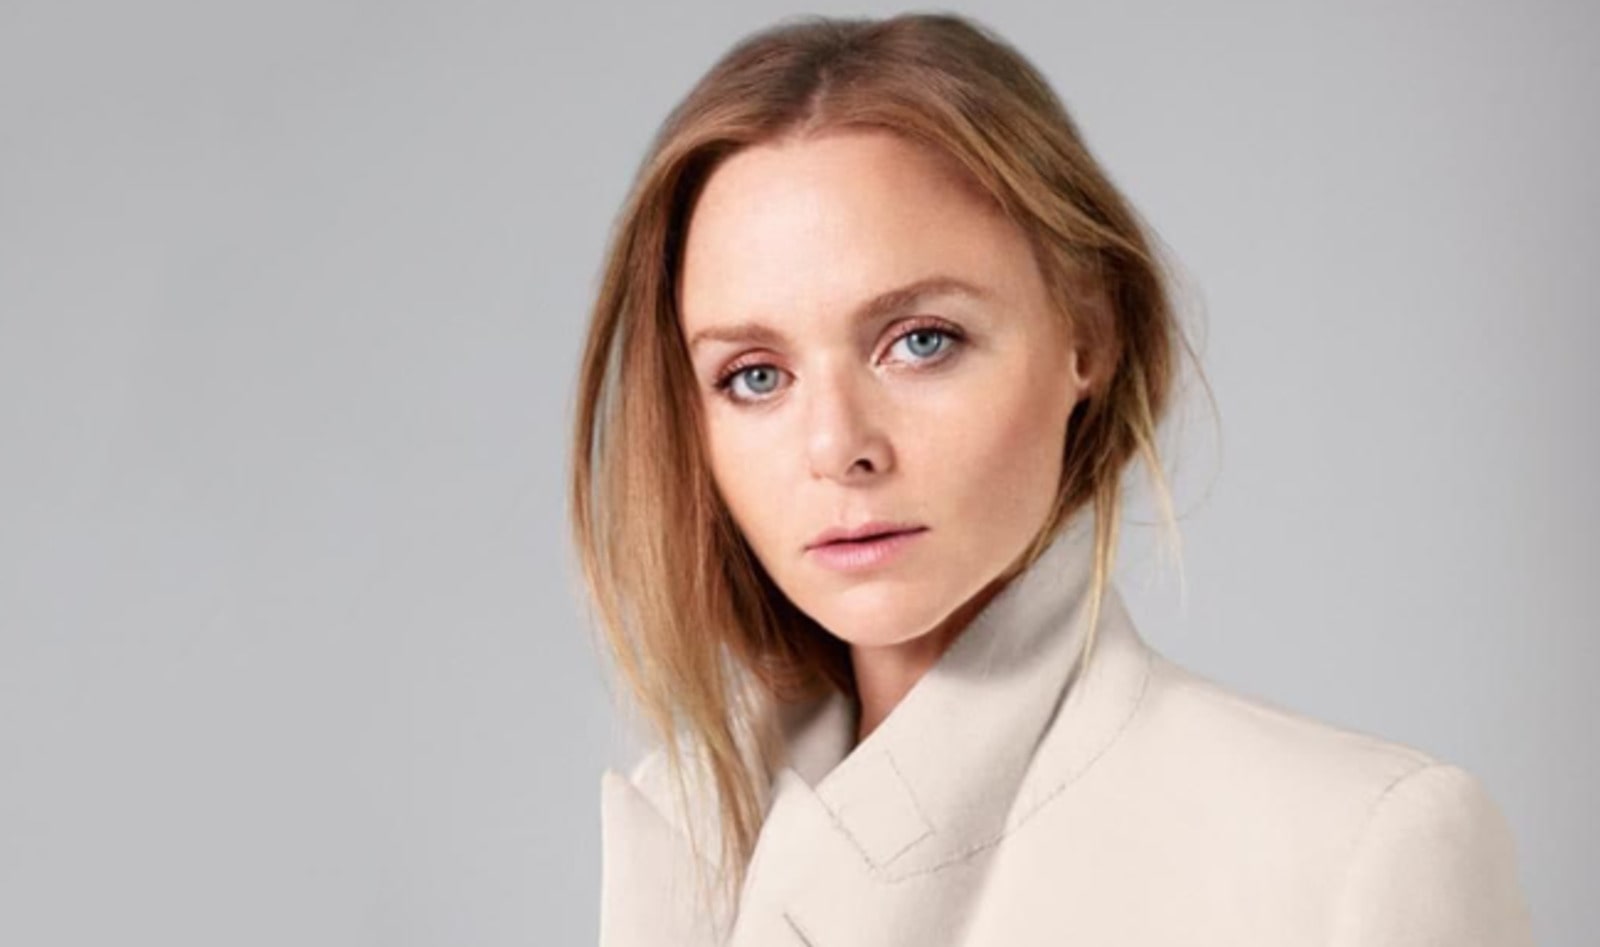 Stella McCartney's Autumn 2021 Collection is Vegan and Sustainable